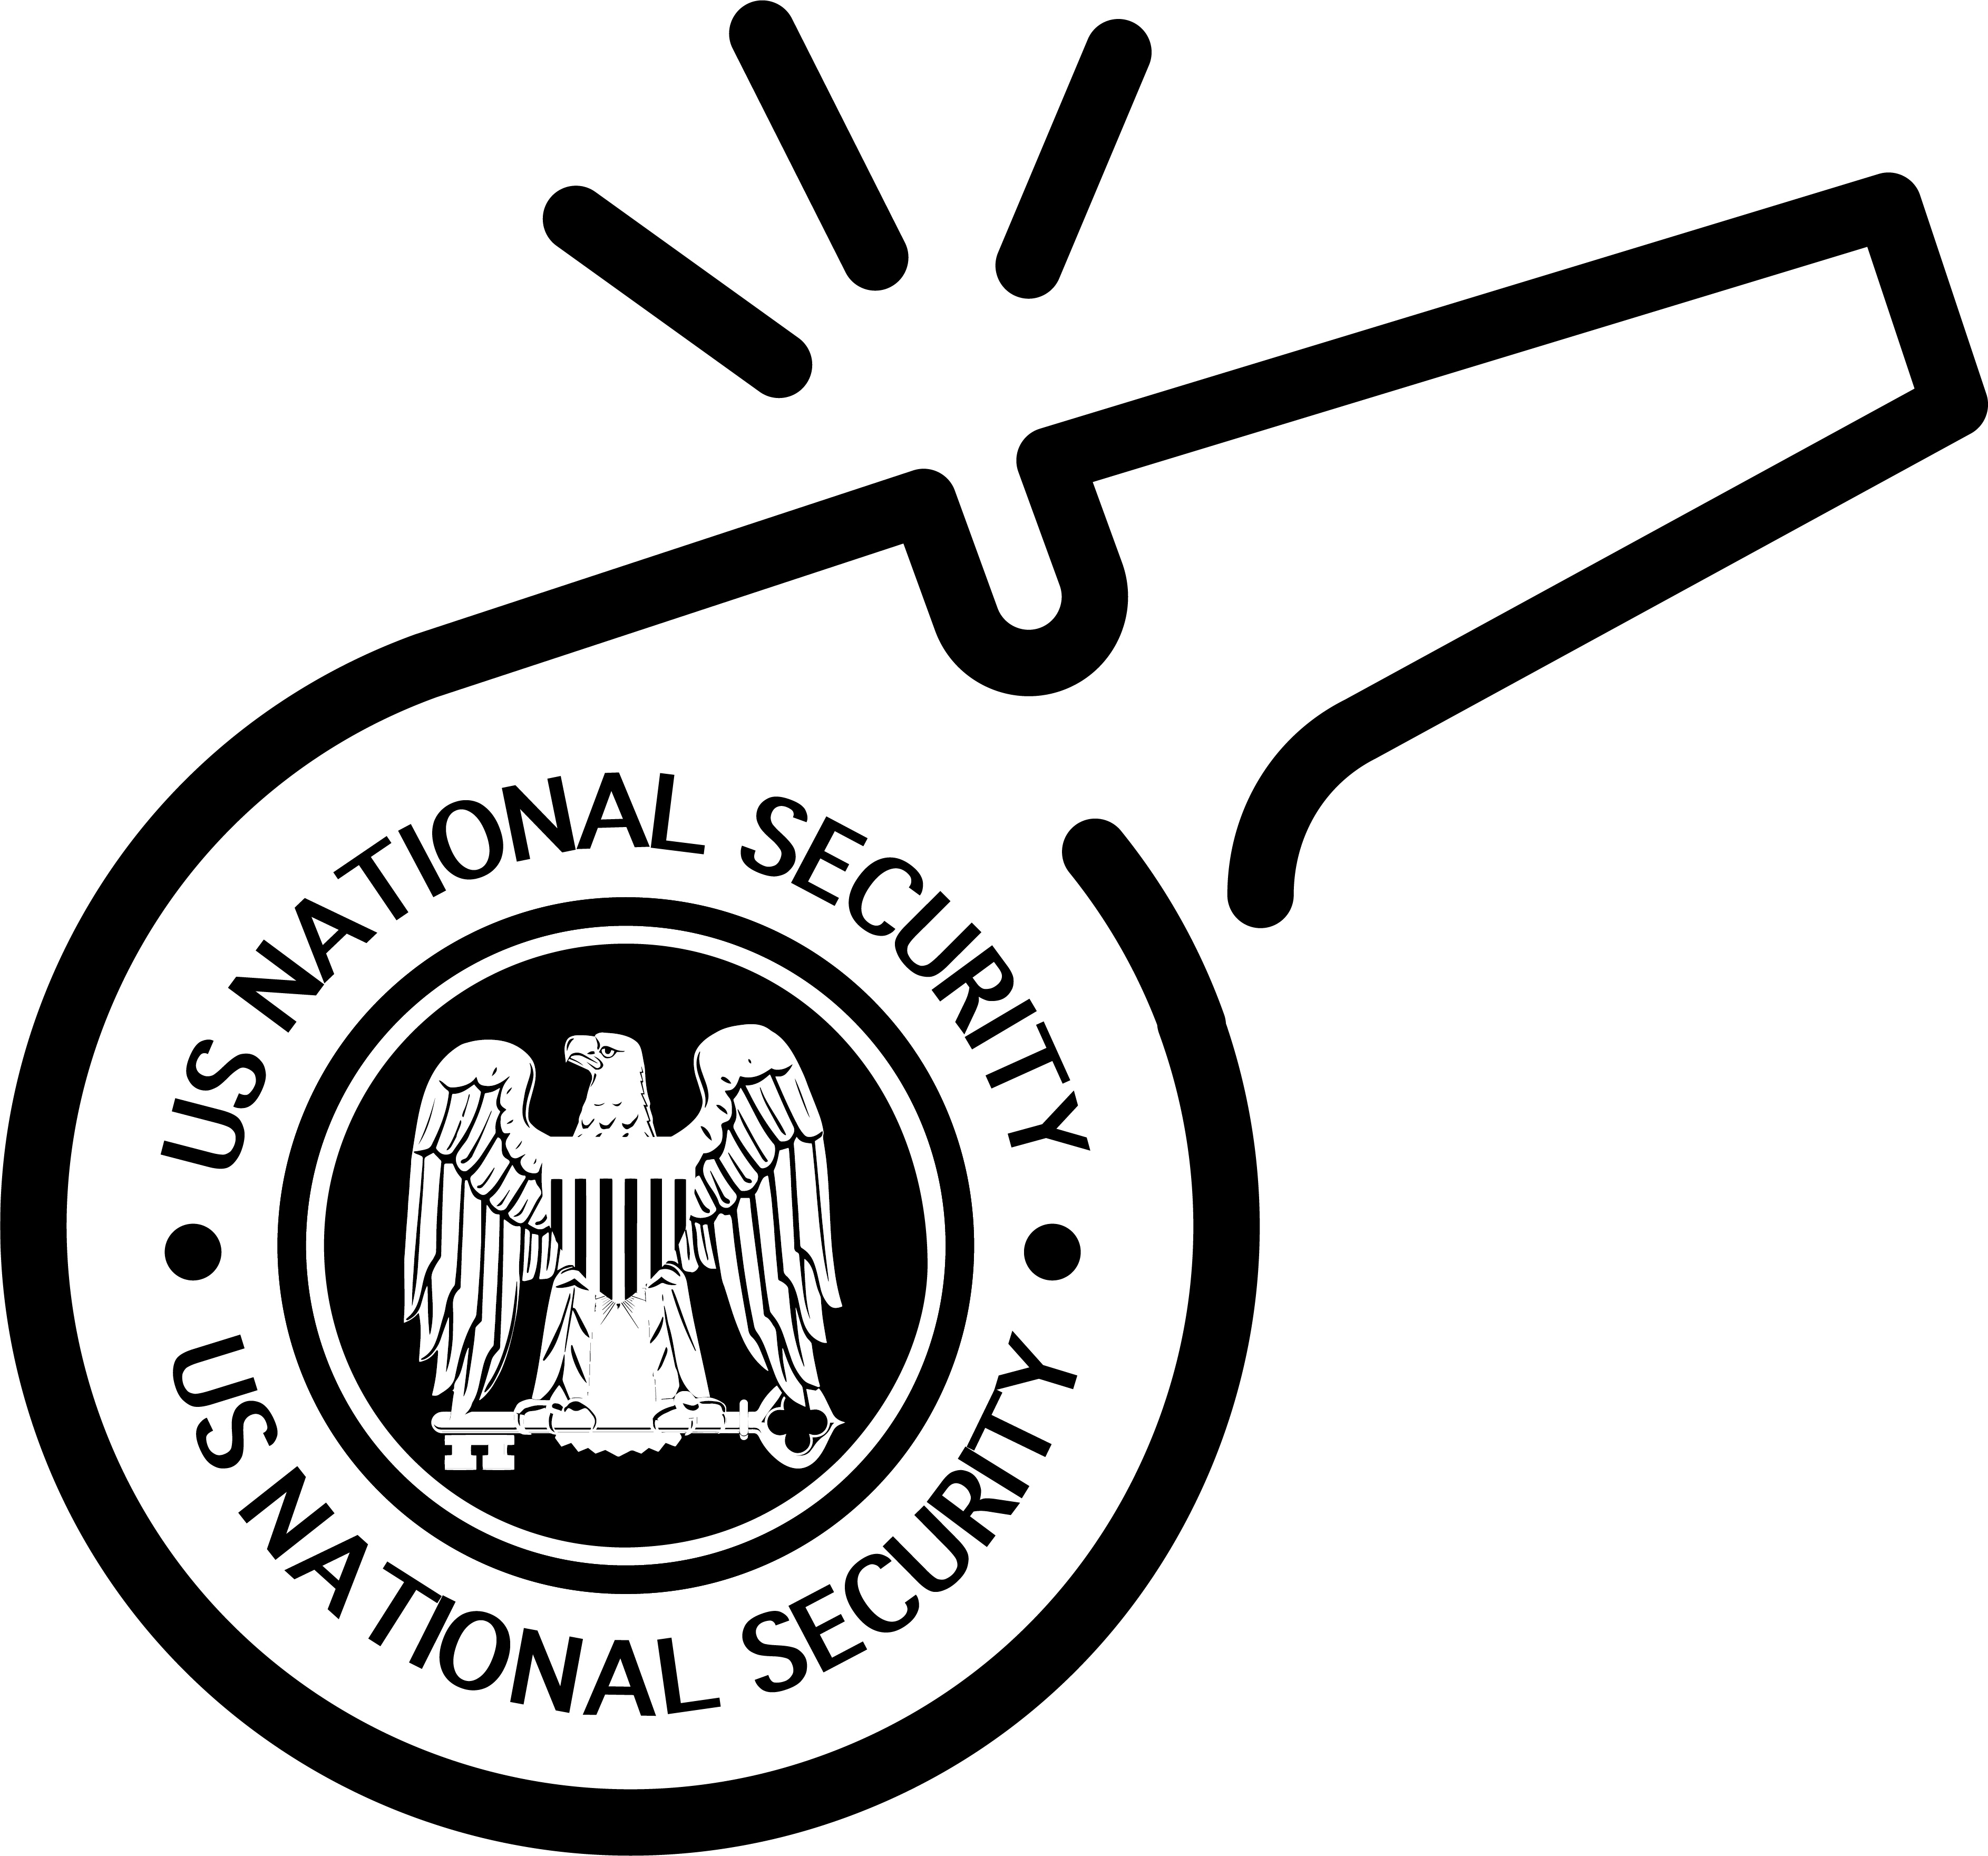 Debating U.S. National Security Whistleblowing: Secrets, the State, and Democracy, A Discussion with Whistleblowers, Advocates, and Historians